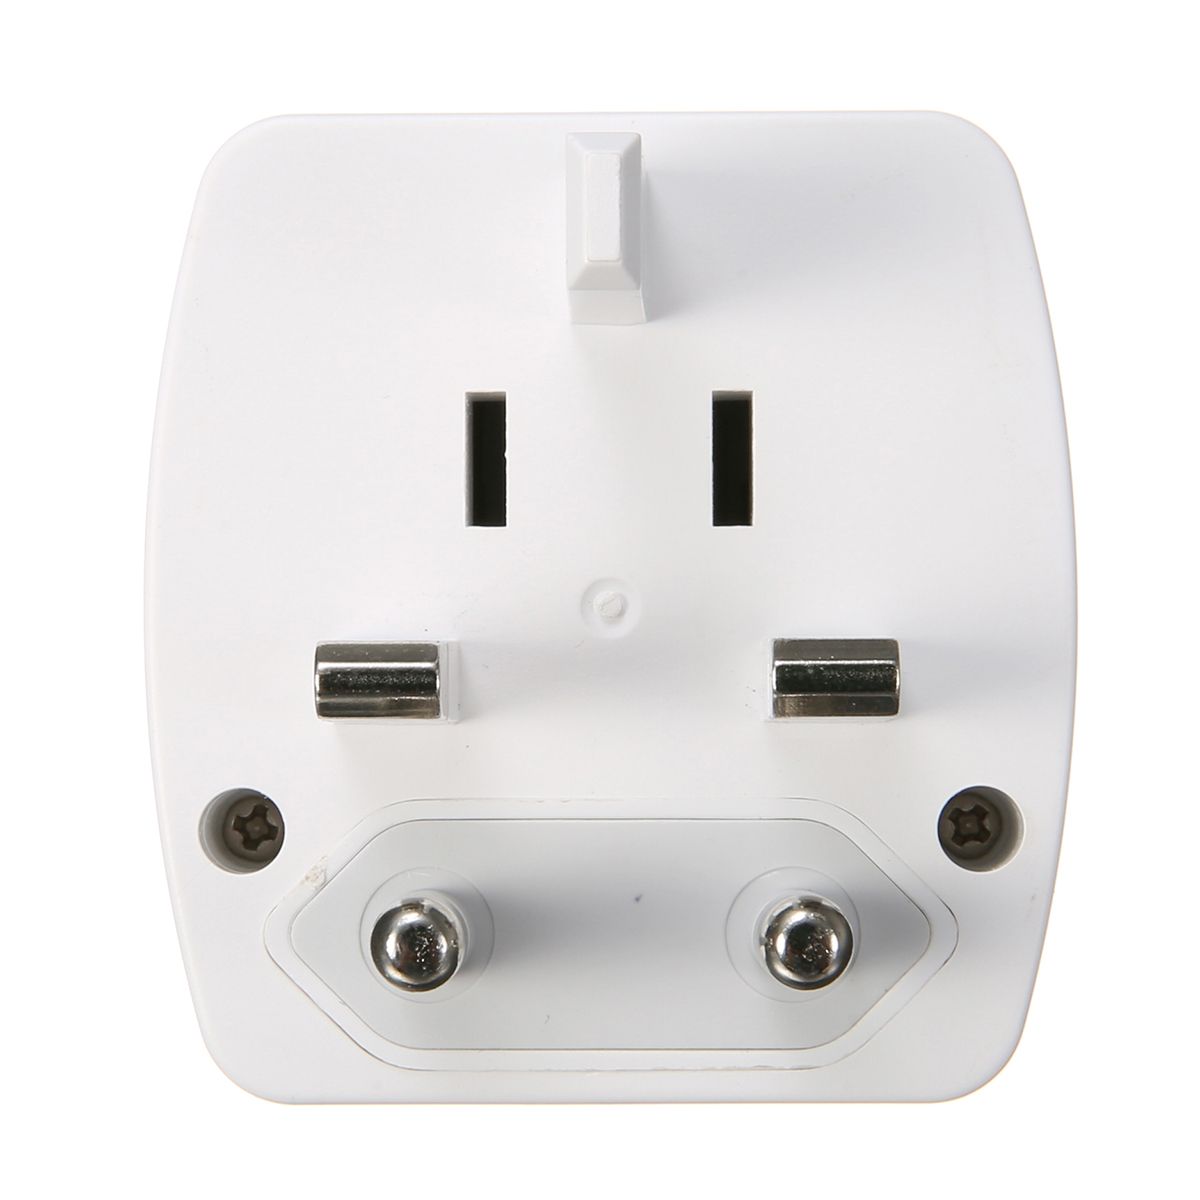 Universal-Travel-Power-Socket-to-AU-UK-US-EU-Converter-Charger-for-MObile-Phone-1175386